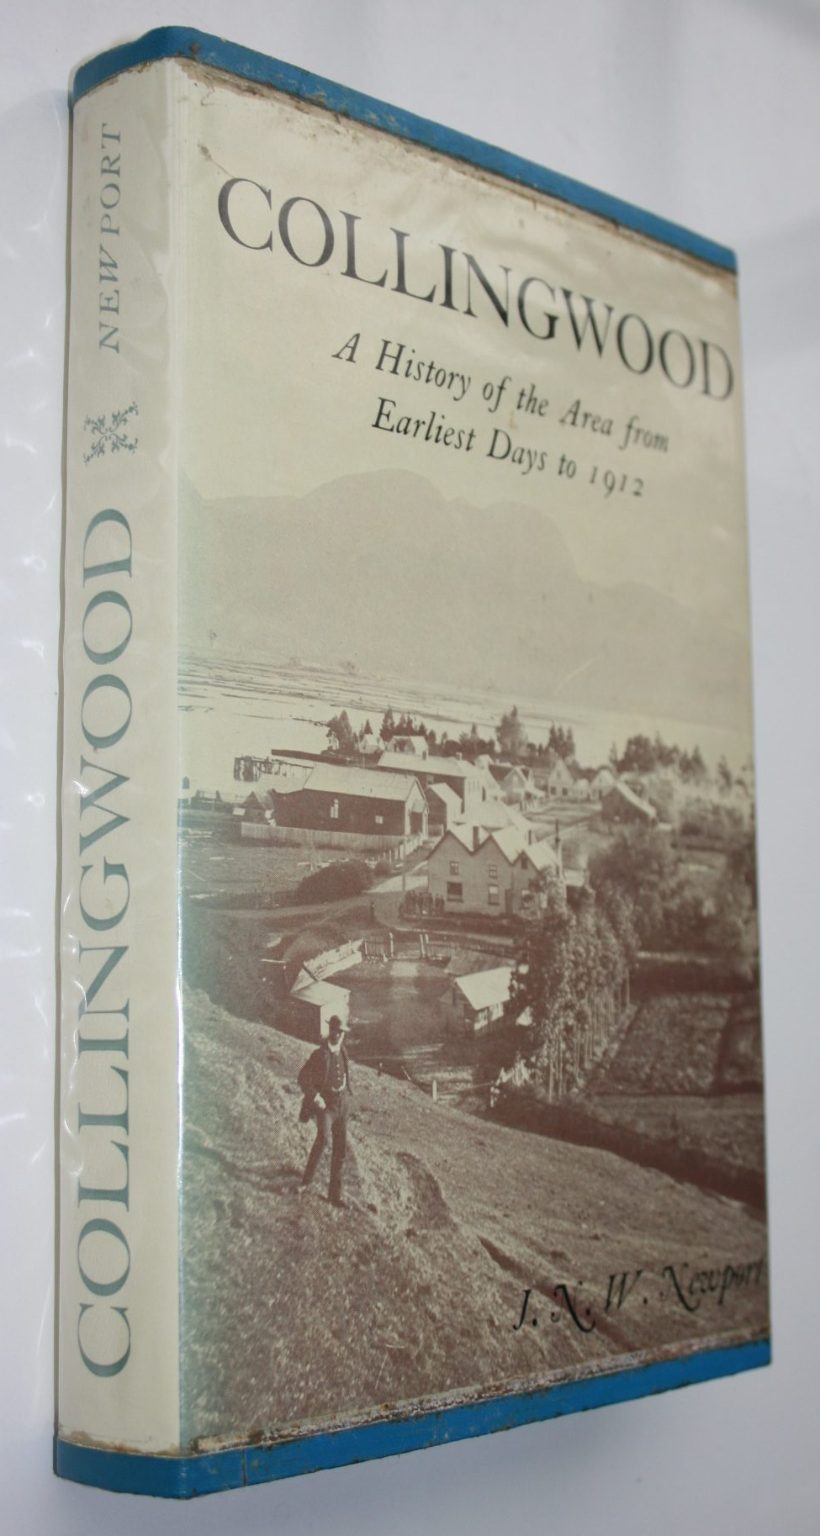 Collingwood: A History of the Area from Earliest Days to 1912 by J.N.W. Newport. SIGNED BY AUTHOR.